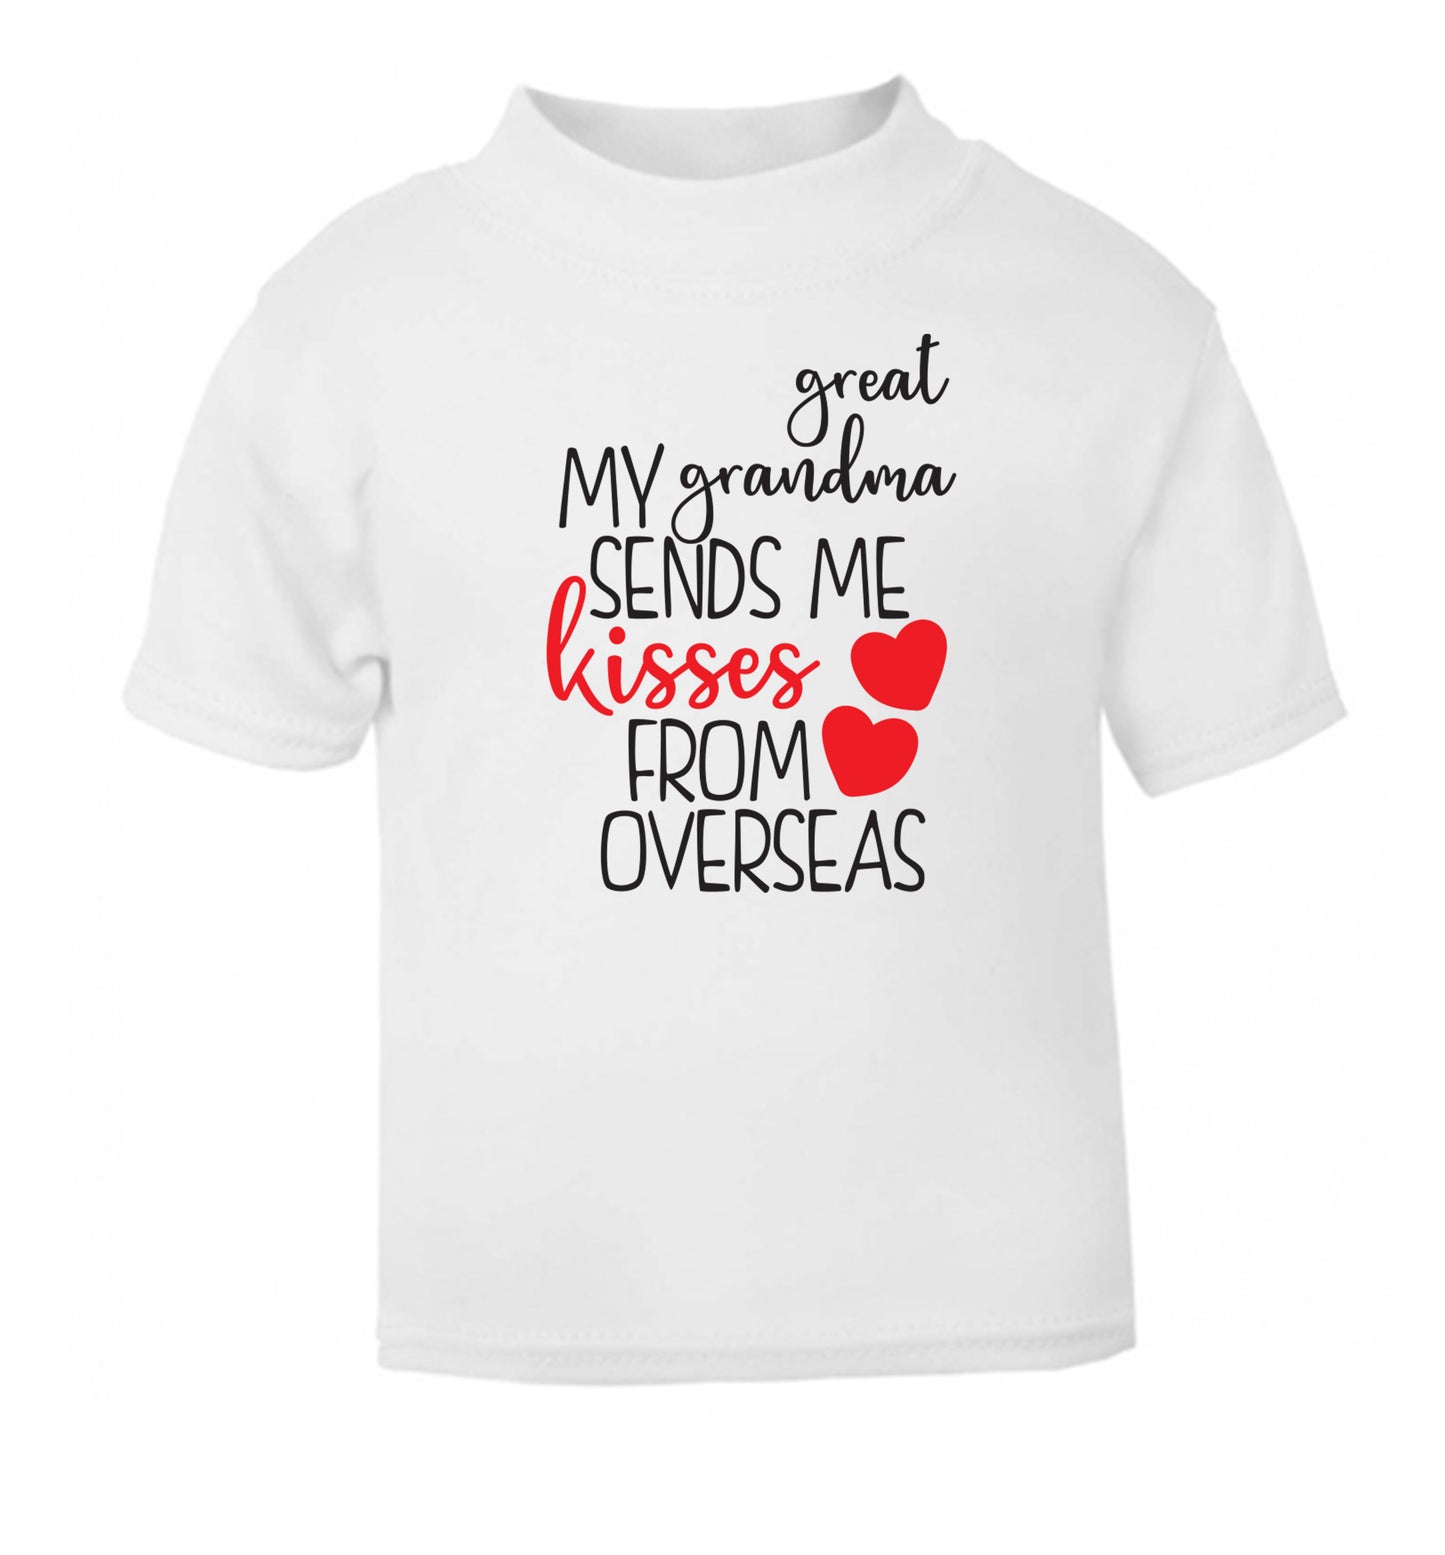 My great grandma sends me kisses from overseas white Baby Toddler Tshirt 2 Years